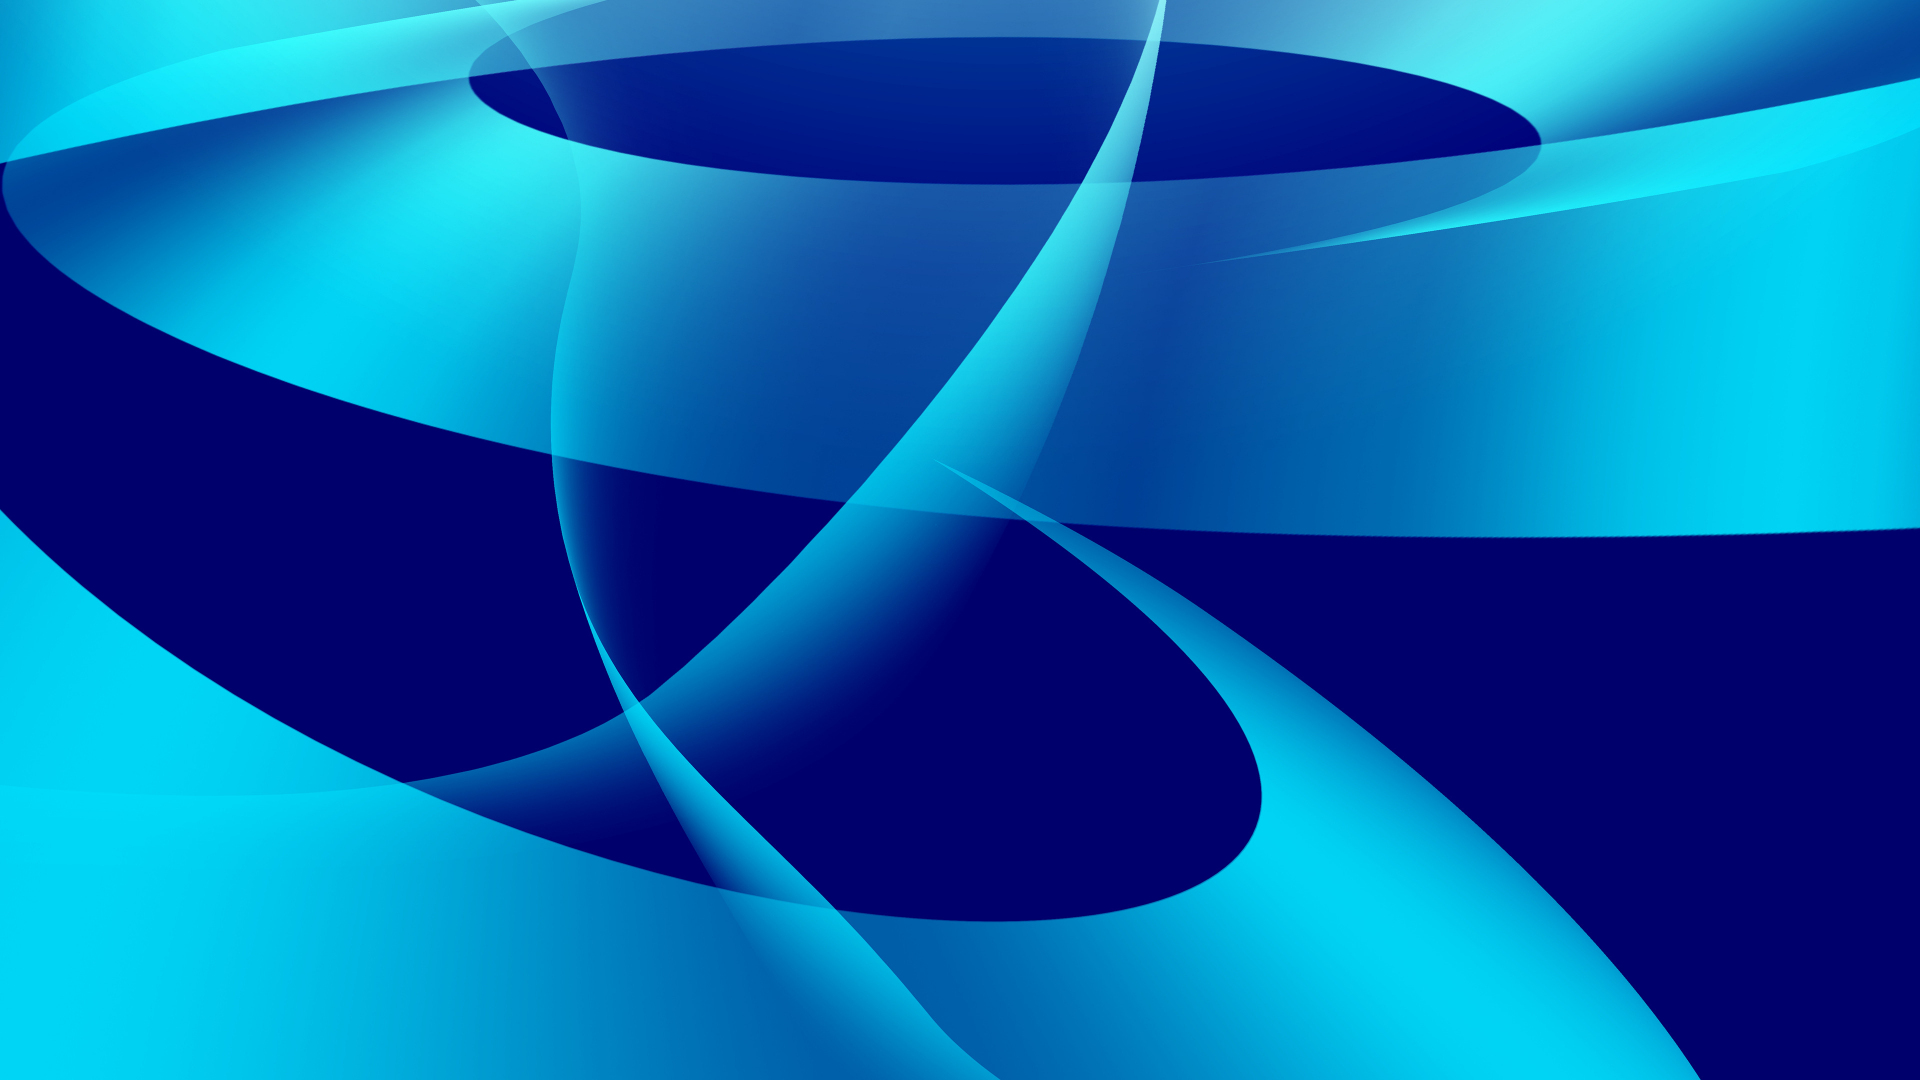 Download 1920x1080 wallpaper blue waves, abstract, blue ...